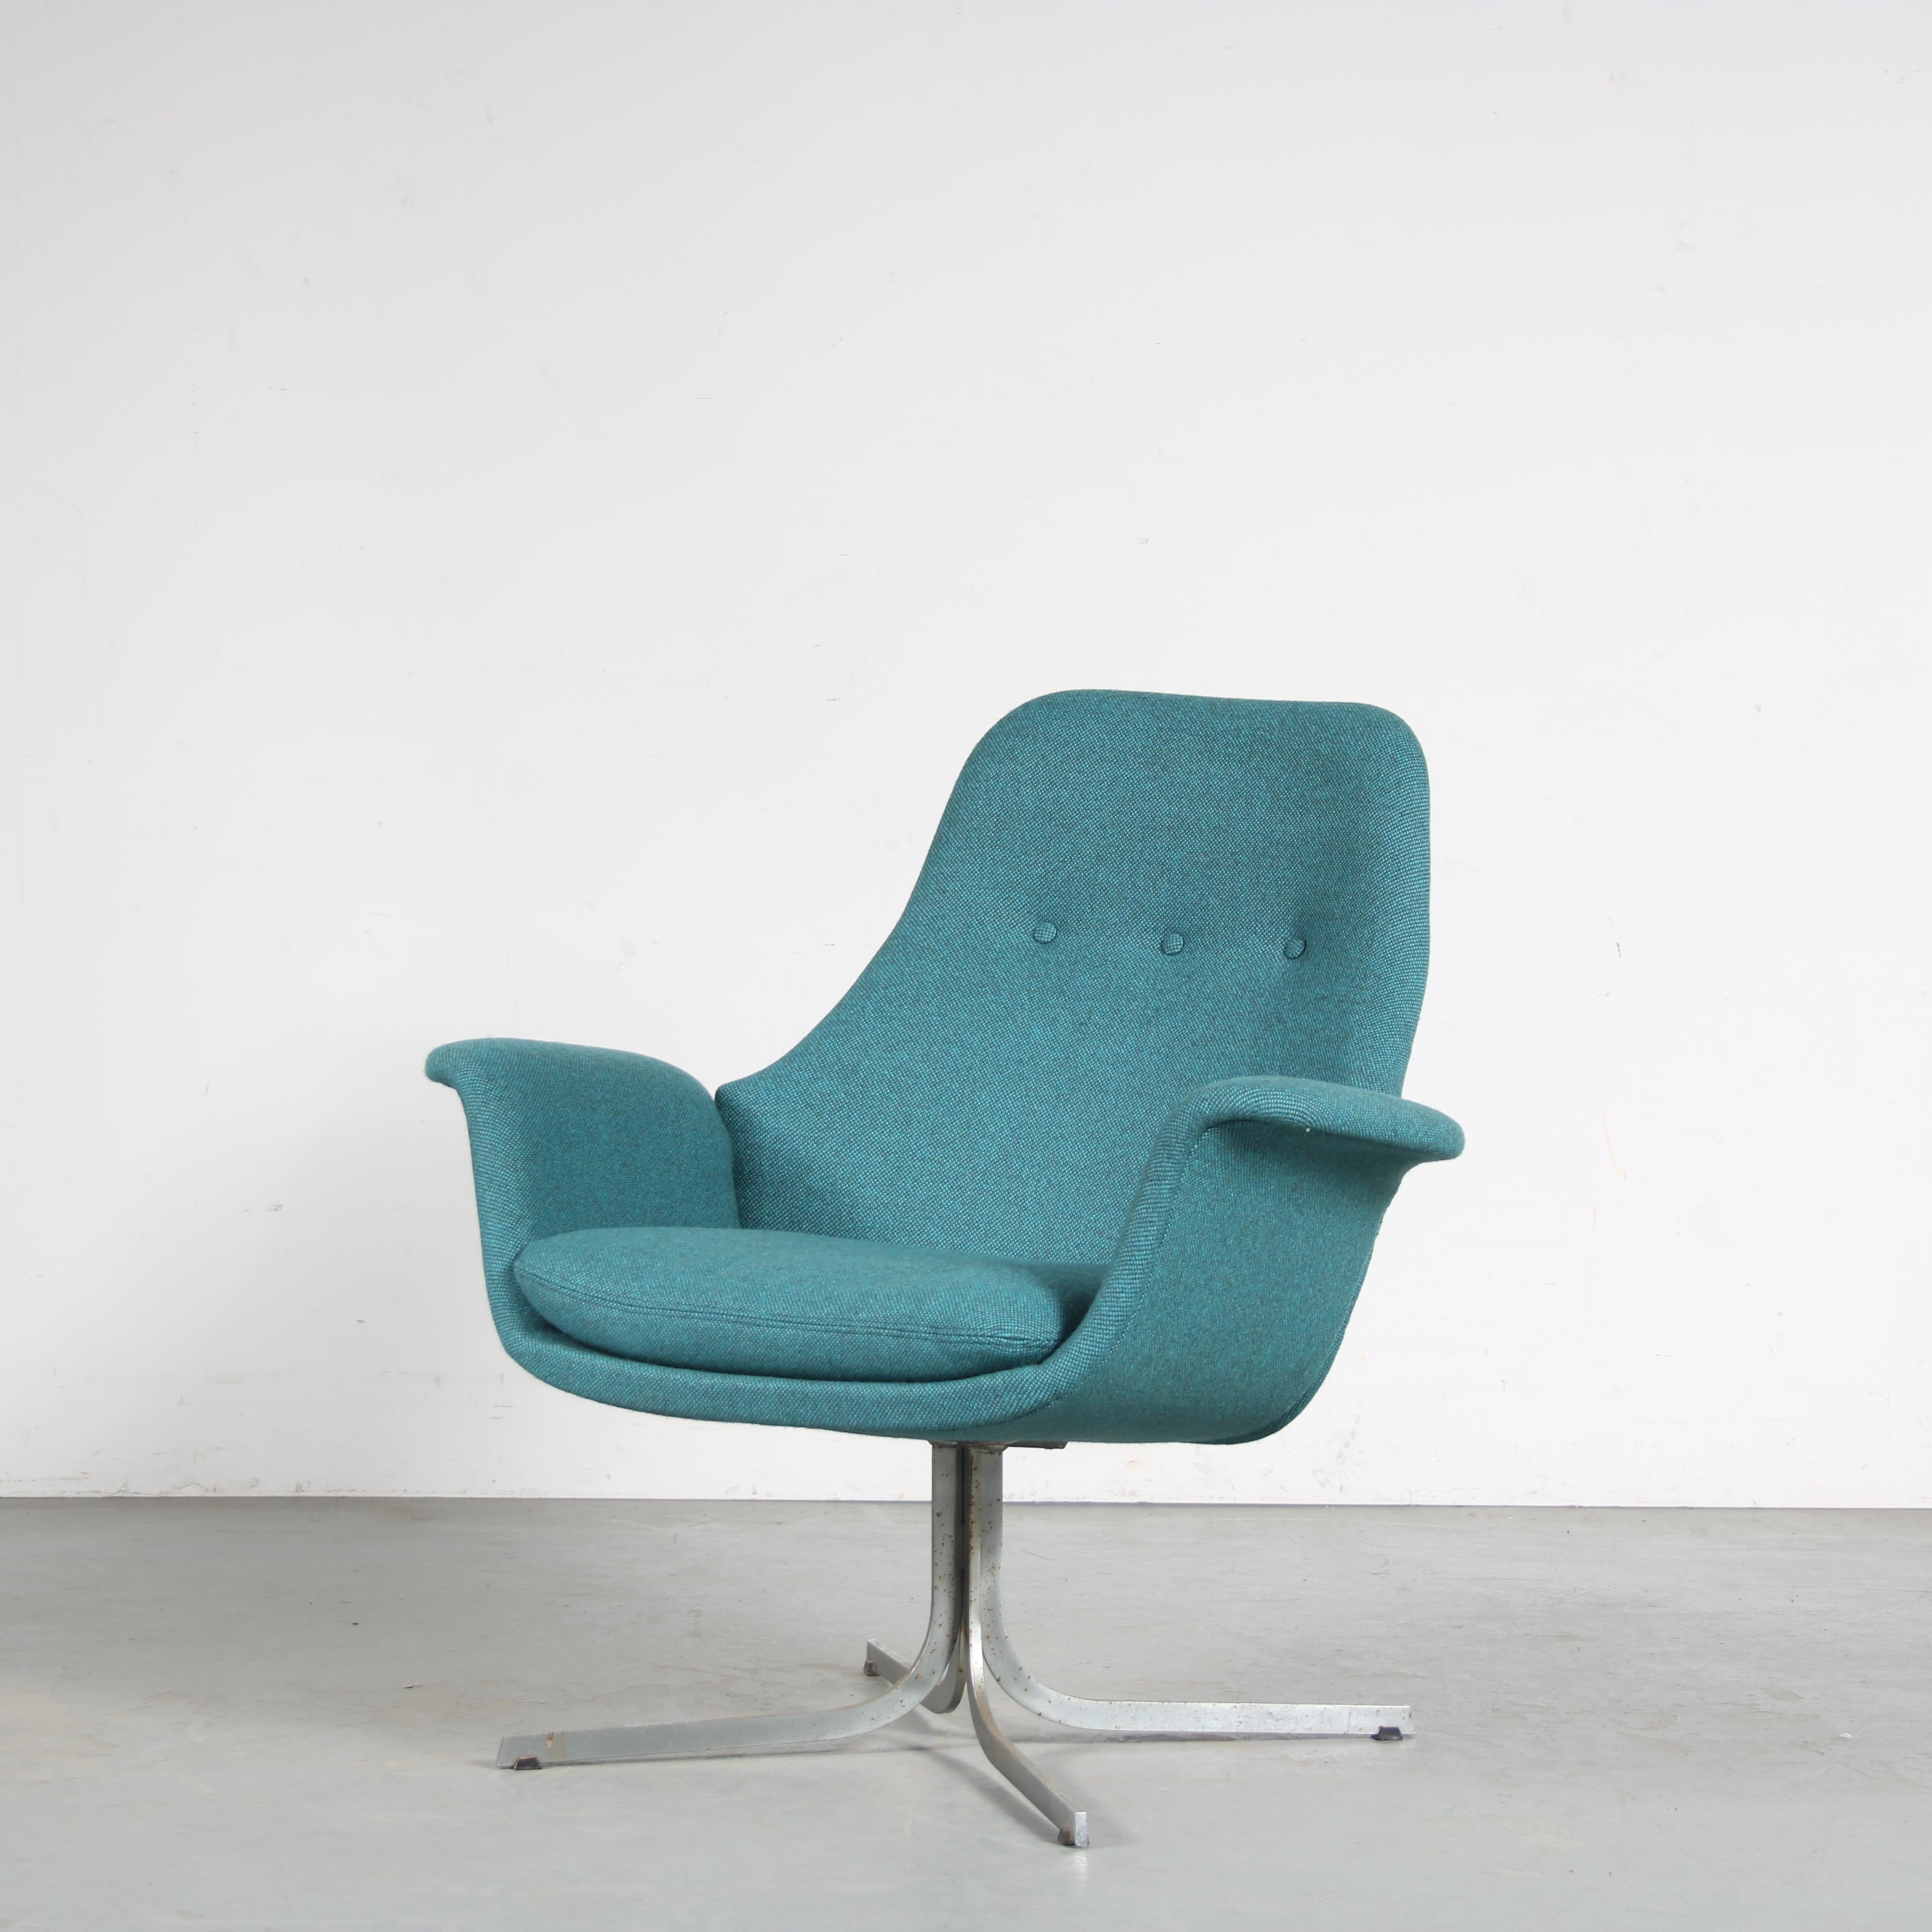 A rare model lounge chair designed by Pierre Paulin, manufactured by Artifort in the Netherlands around 1960.

This eye-catching piece has a beautiful elegant style. The seat is nicely bent in a tulip like shape. The curved details are typical for